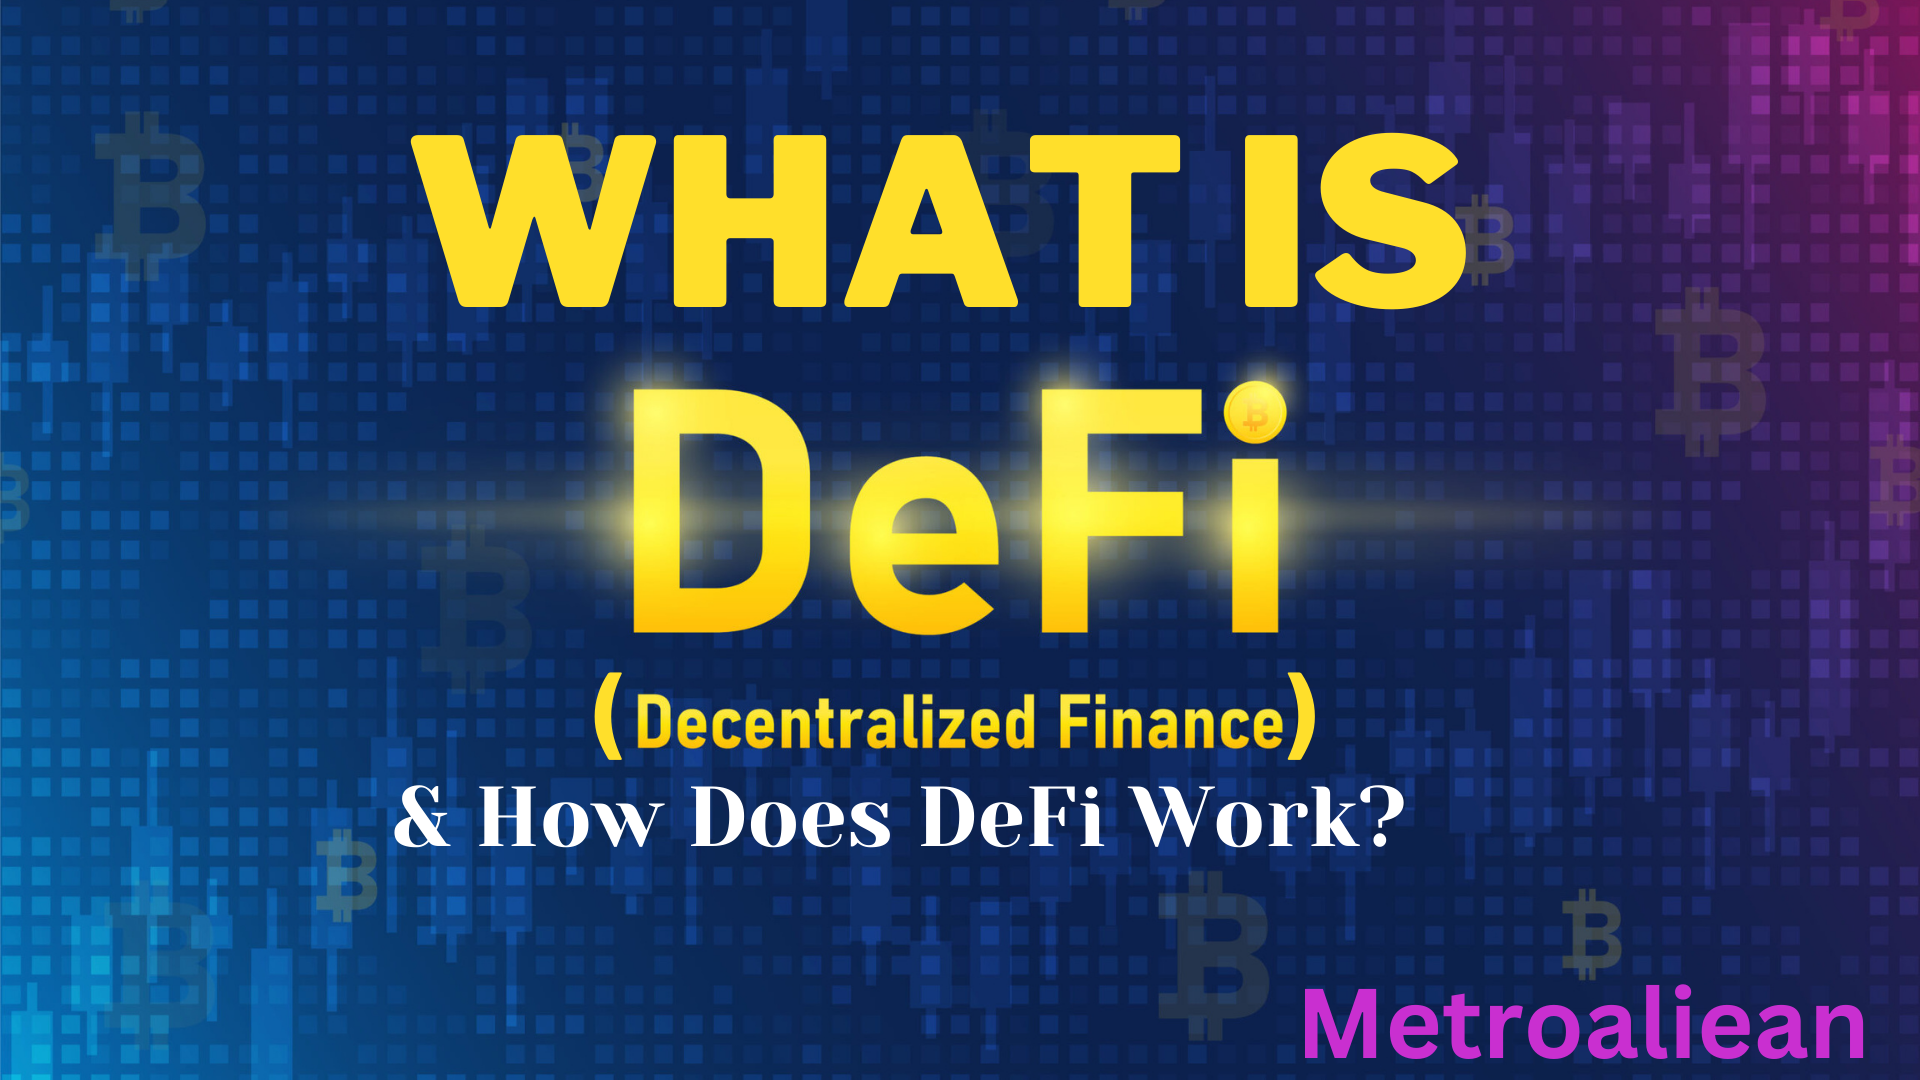 What is DeFi (decentralized finance) and how does DeFi work?